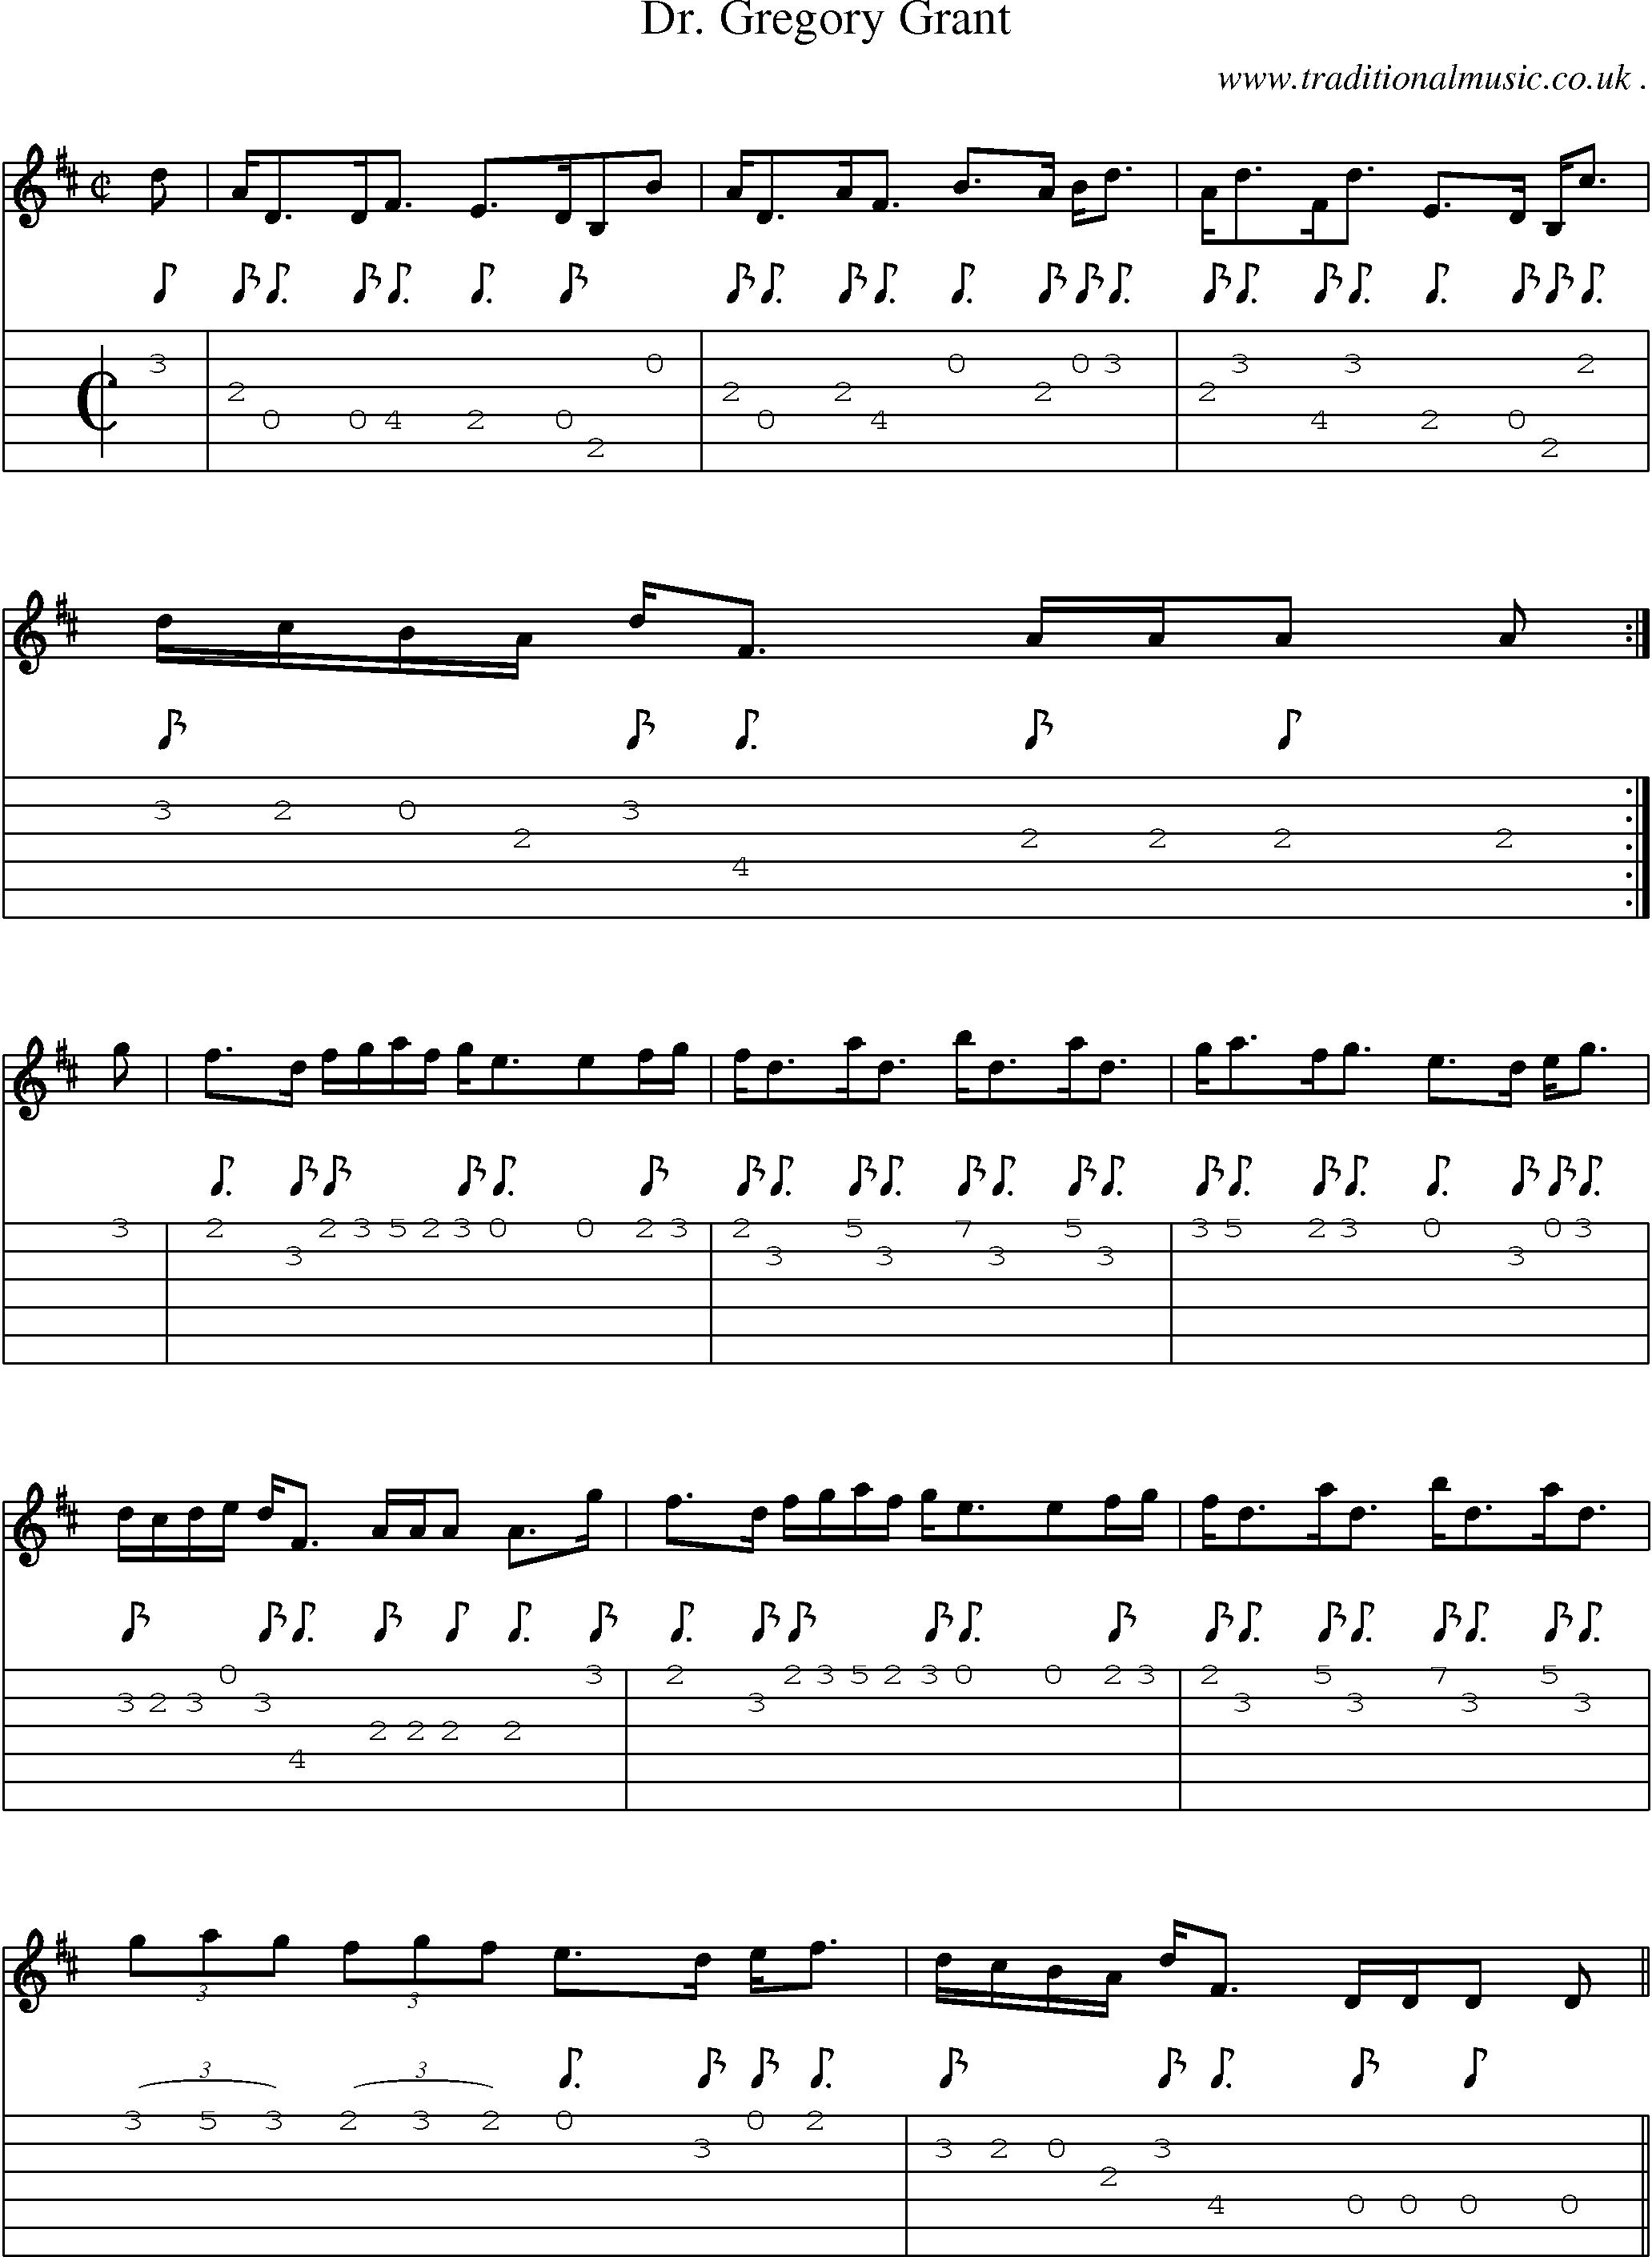 Sheet-music  score, Chords and Guitar Tabs for Dr Gregory Grant